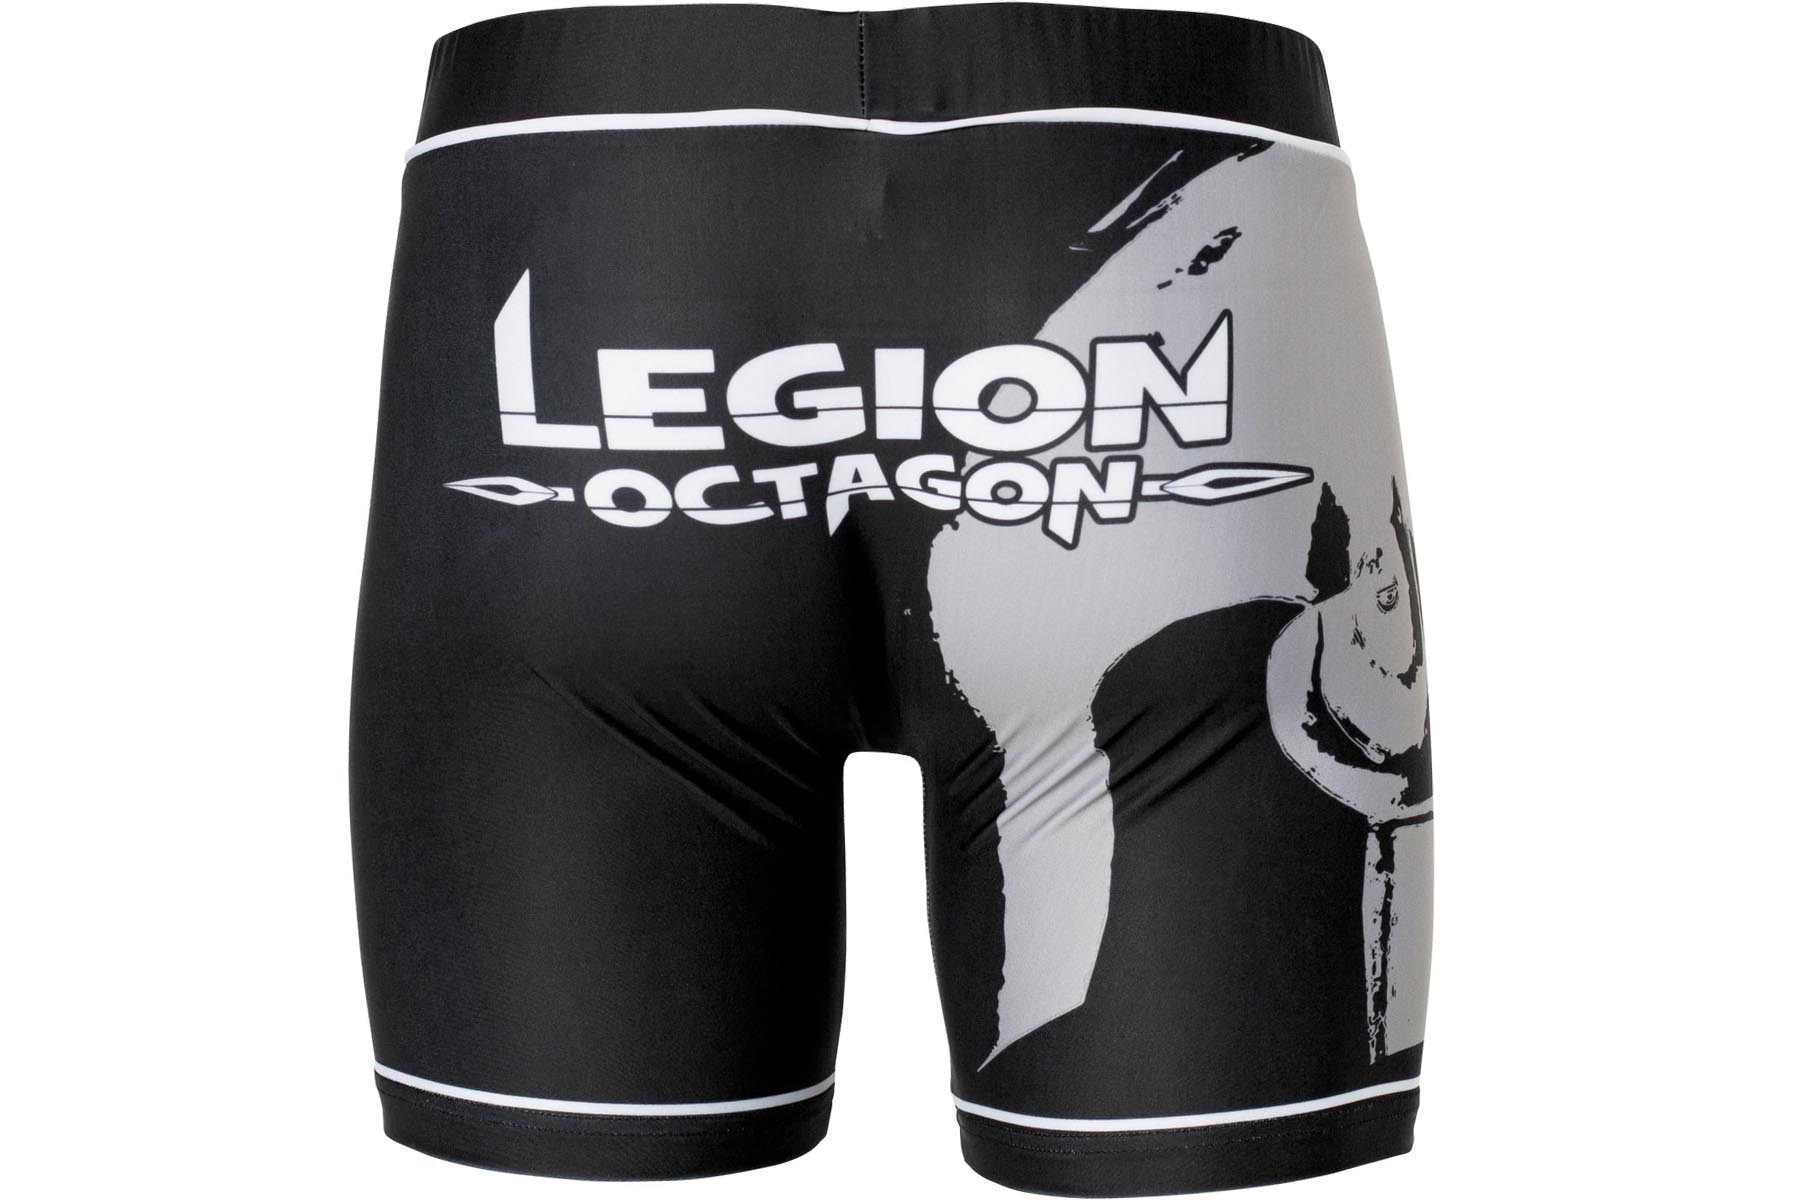 Compression shorts for MMA training and competition - PHANTOM